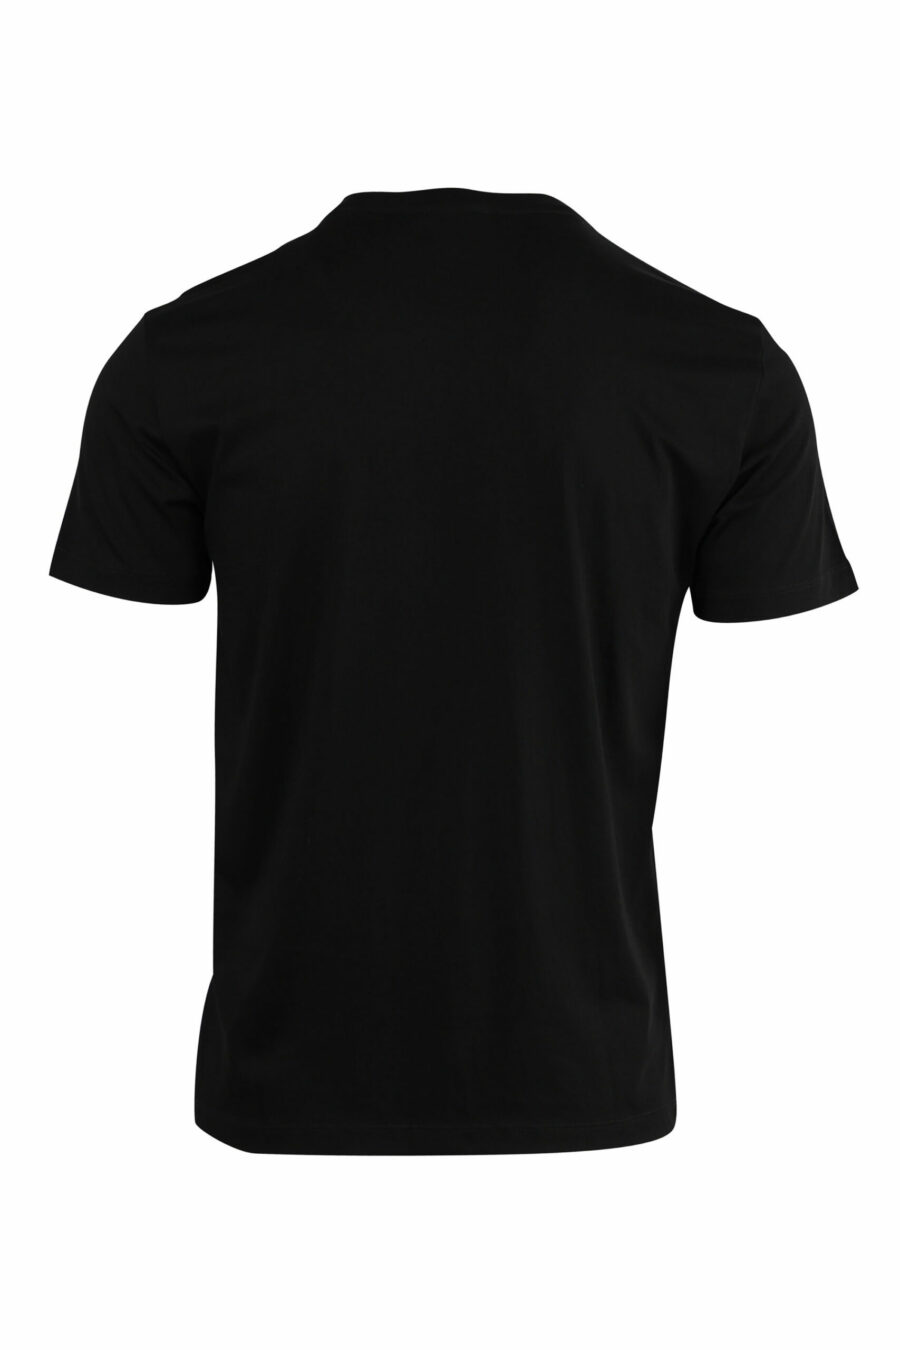 Black T-shirt with gold "lux identity" mini-logo label - 8057767515805 2 scaled